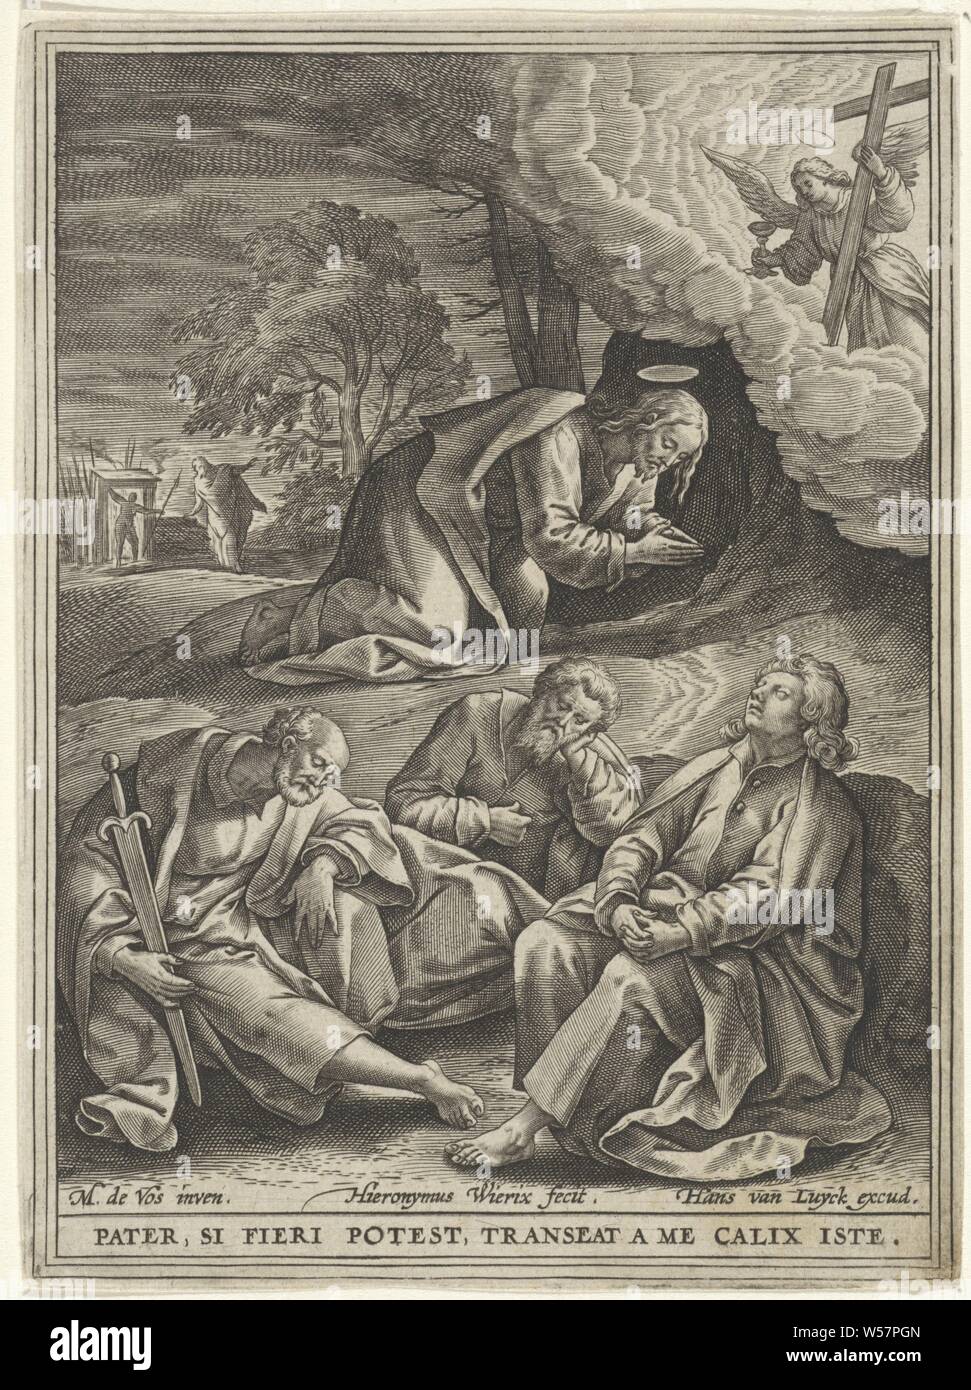 Christ in the Garden of Gethsemane Passion of Christ (series title), Christ prays in the court of Gethsemane. An angel with a chalice appears from heaven. In the foreground Peter, Johannes and Jacobus sleep. In the background, Judas leads soldiers through the gate. In the margin a caption in Latin that refers to the performance., Christ's prayer in the Garden of Gethsemane during the night, Hieronymus Wierix (mentioned on object), Antwerp, 1563 - before 1586, paper, engraving, h 140 mm × w 104 mm Stock Photo